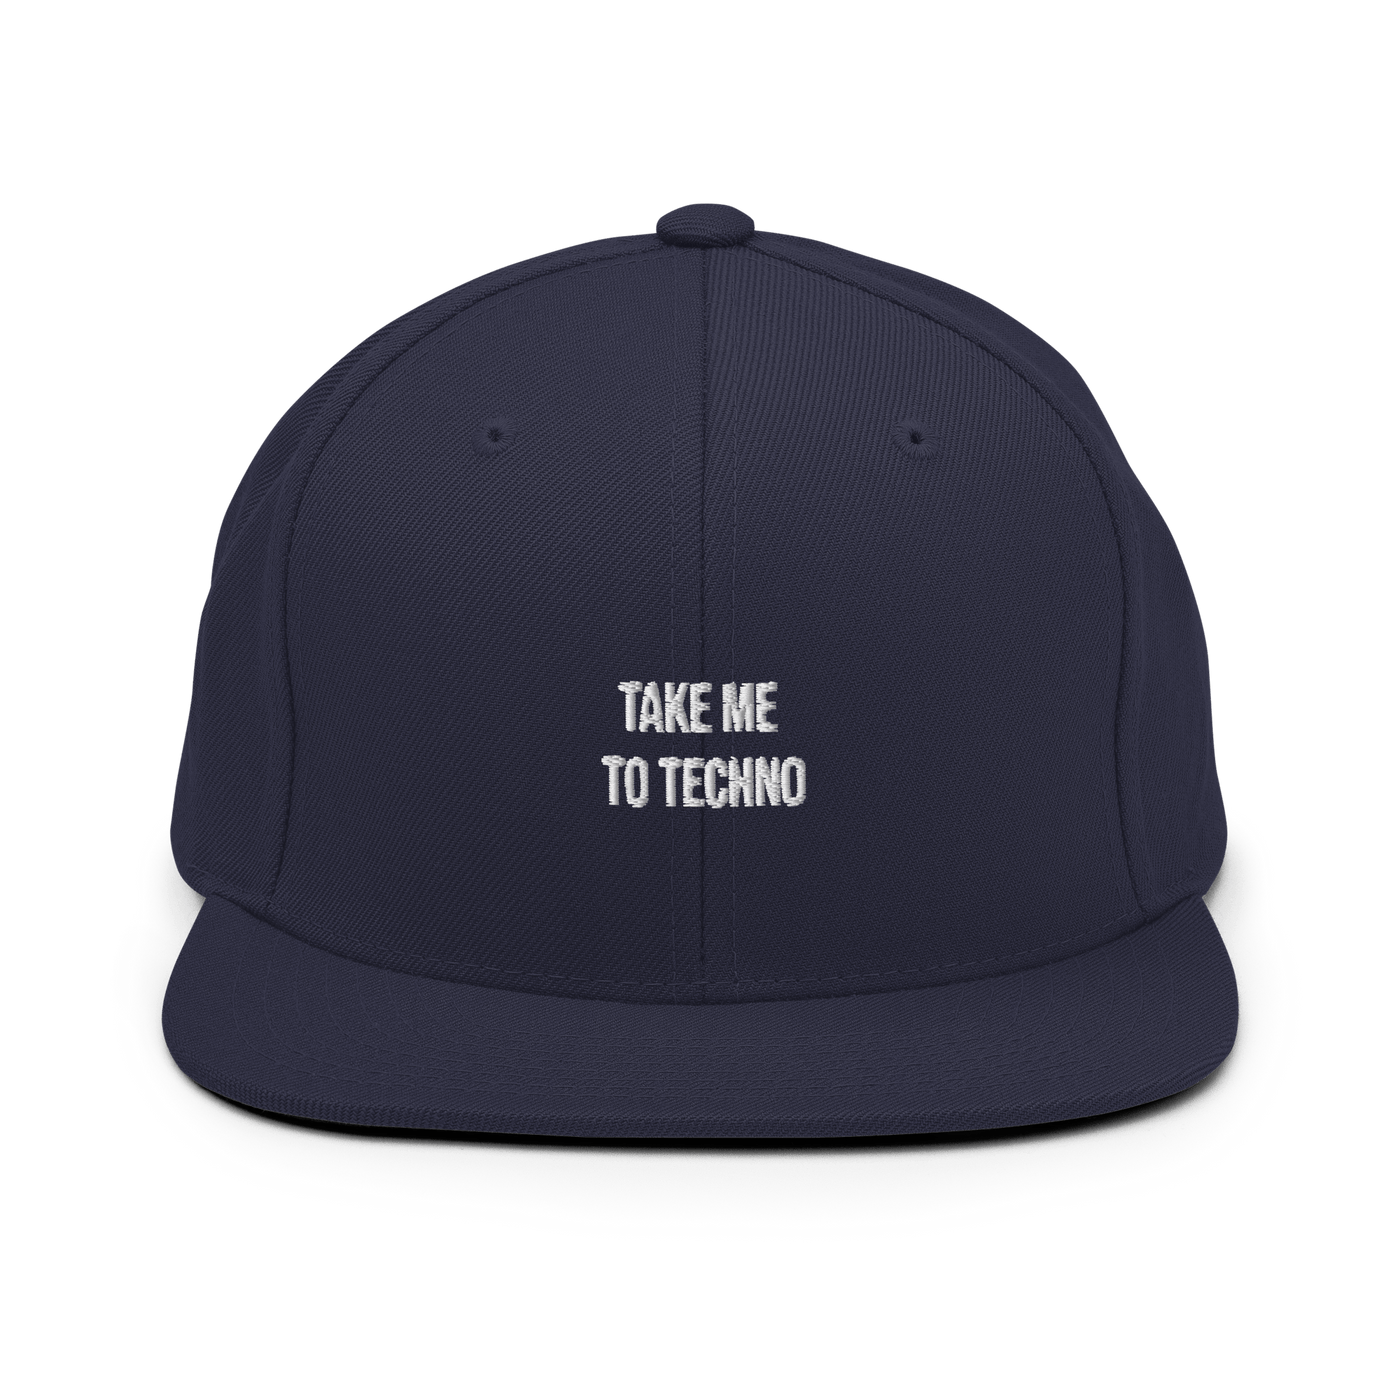 Take me to techno Snapback - Maroon - - Just Another Cap Store